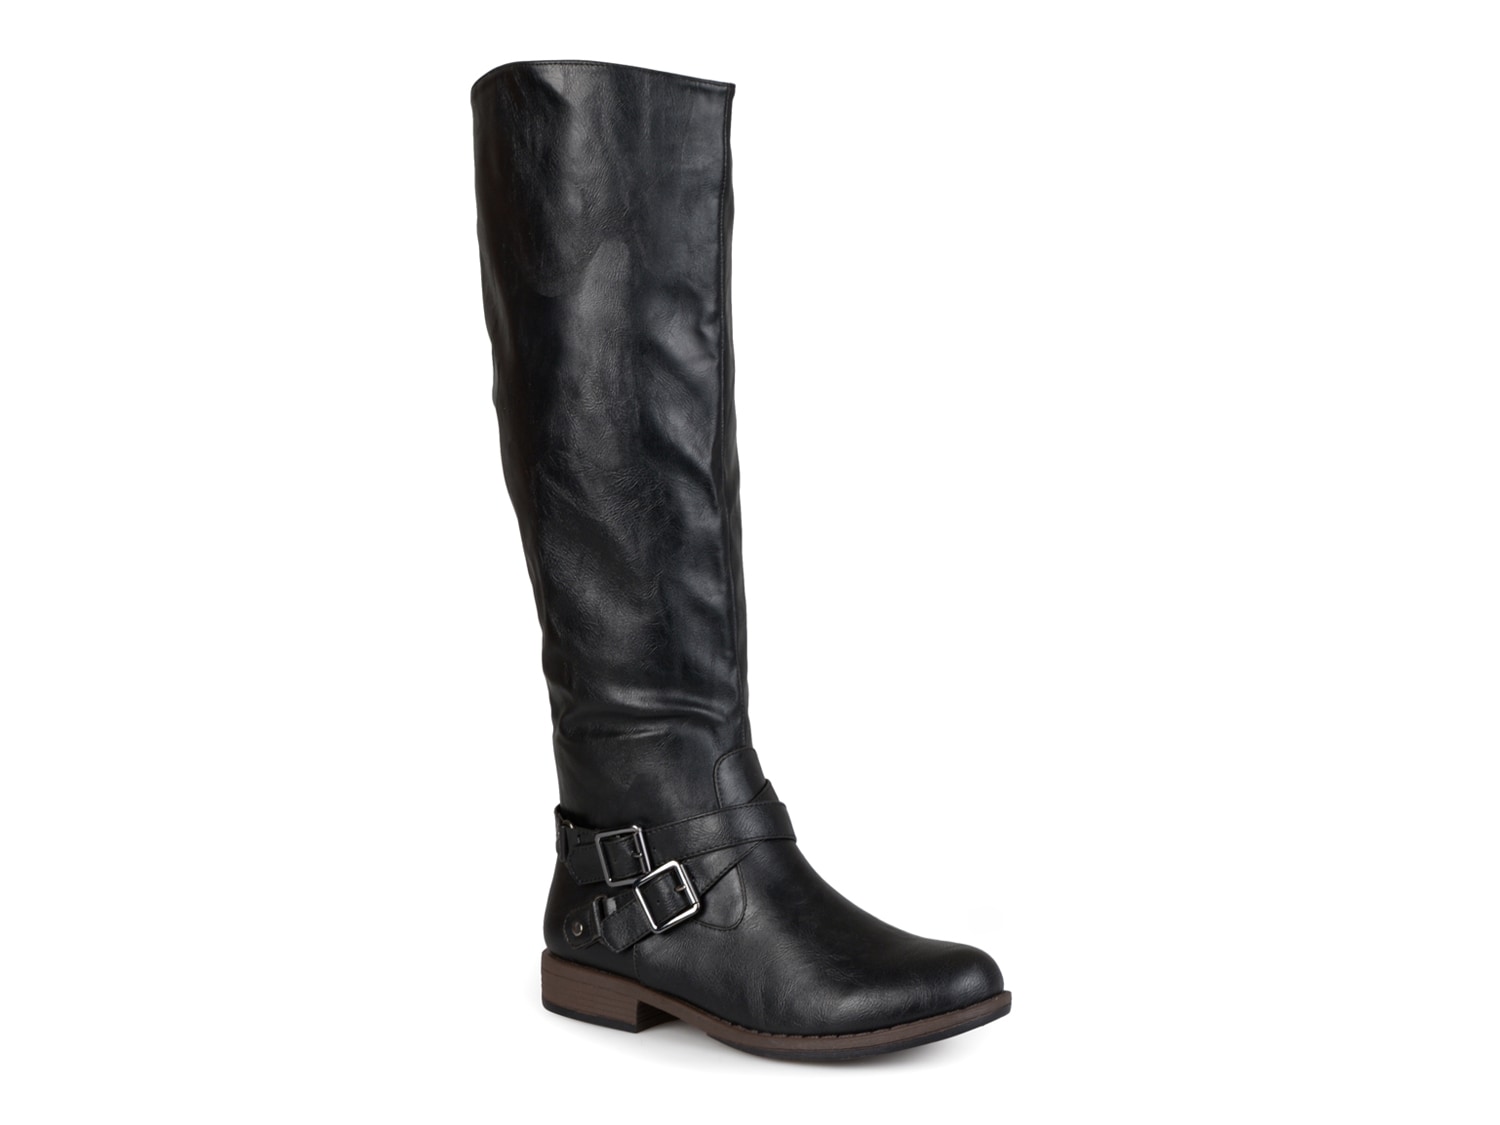 Journee Collection April Riding Boot | DSW